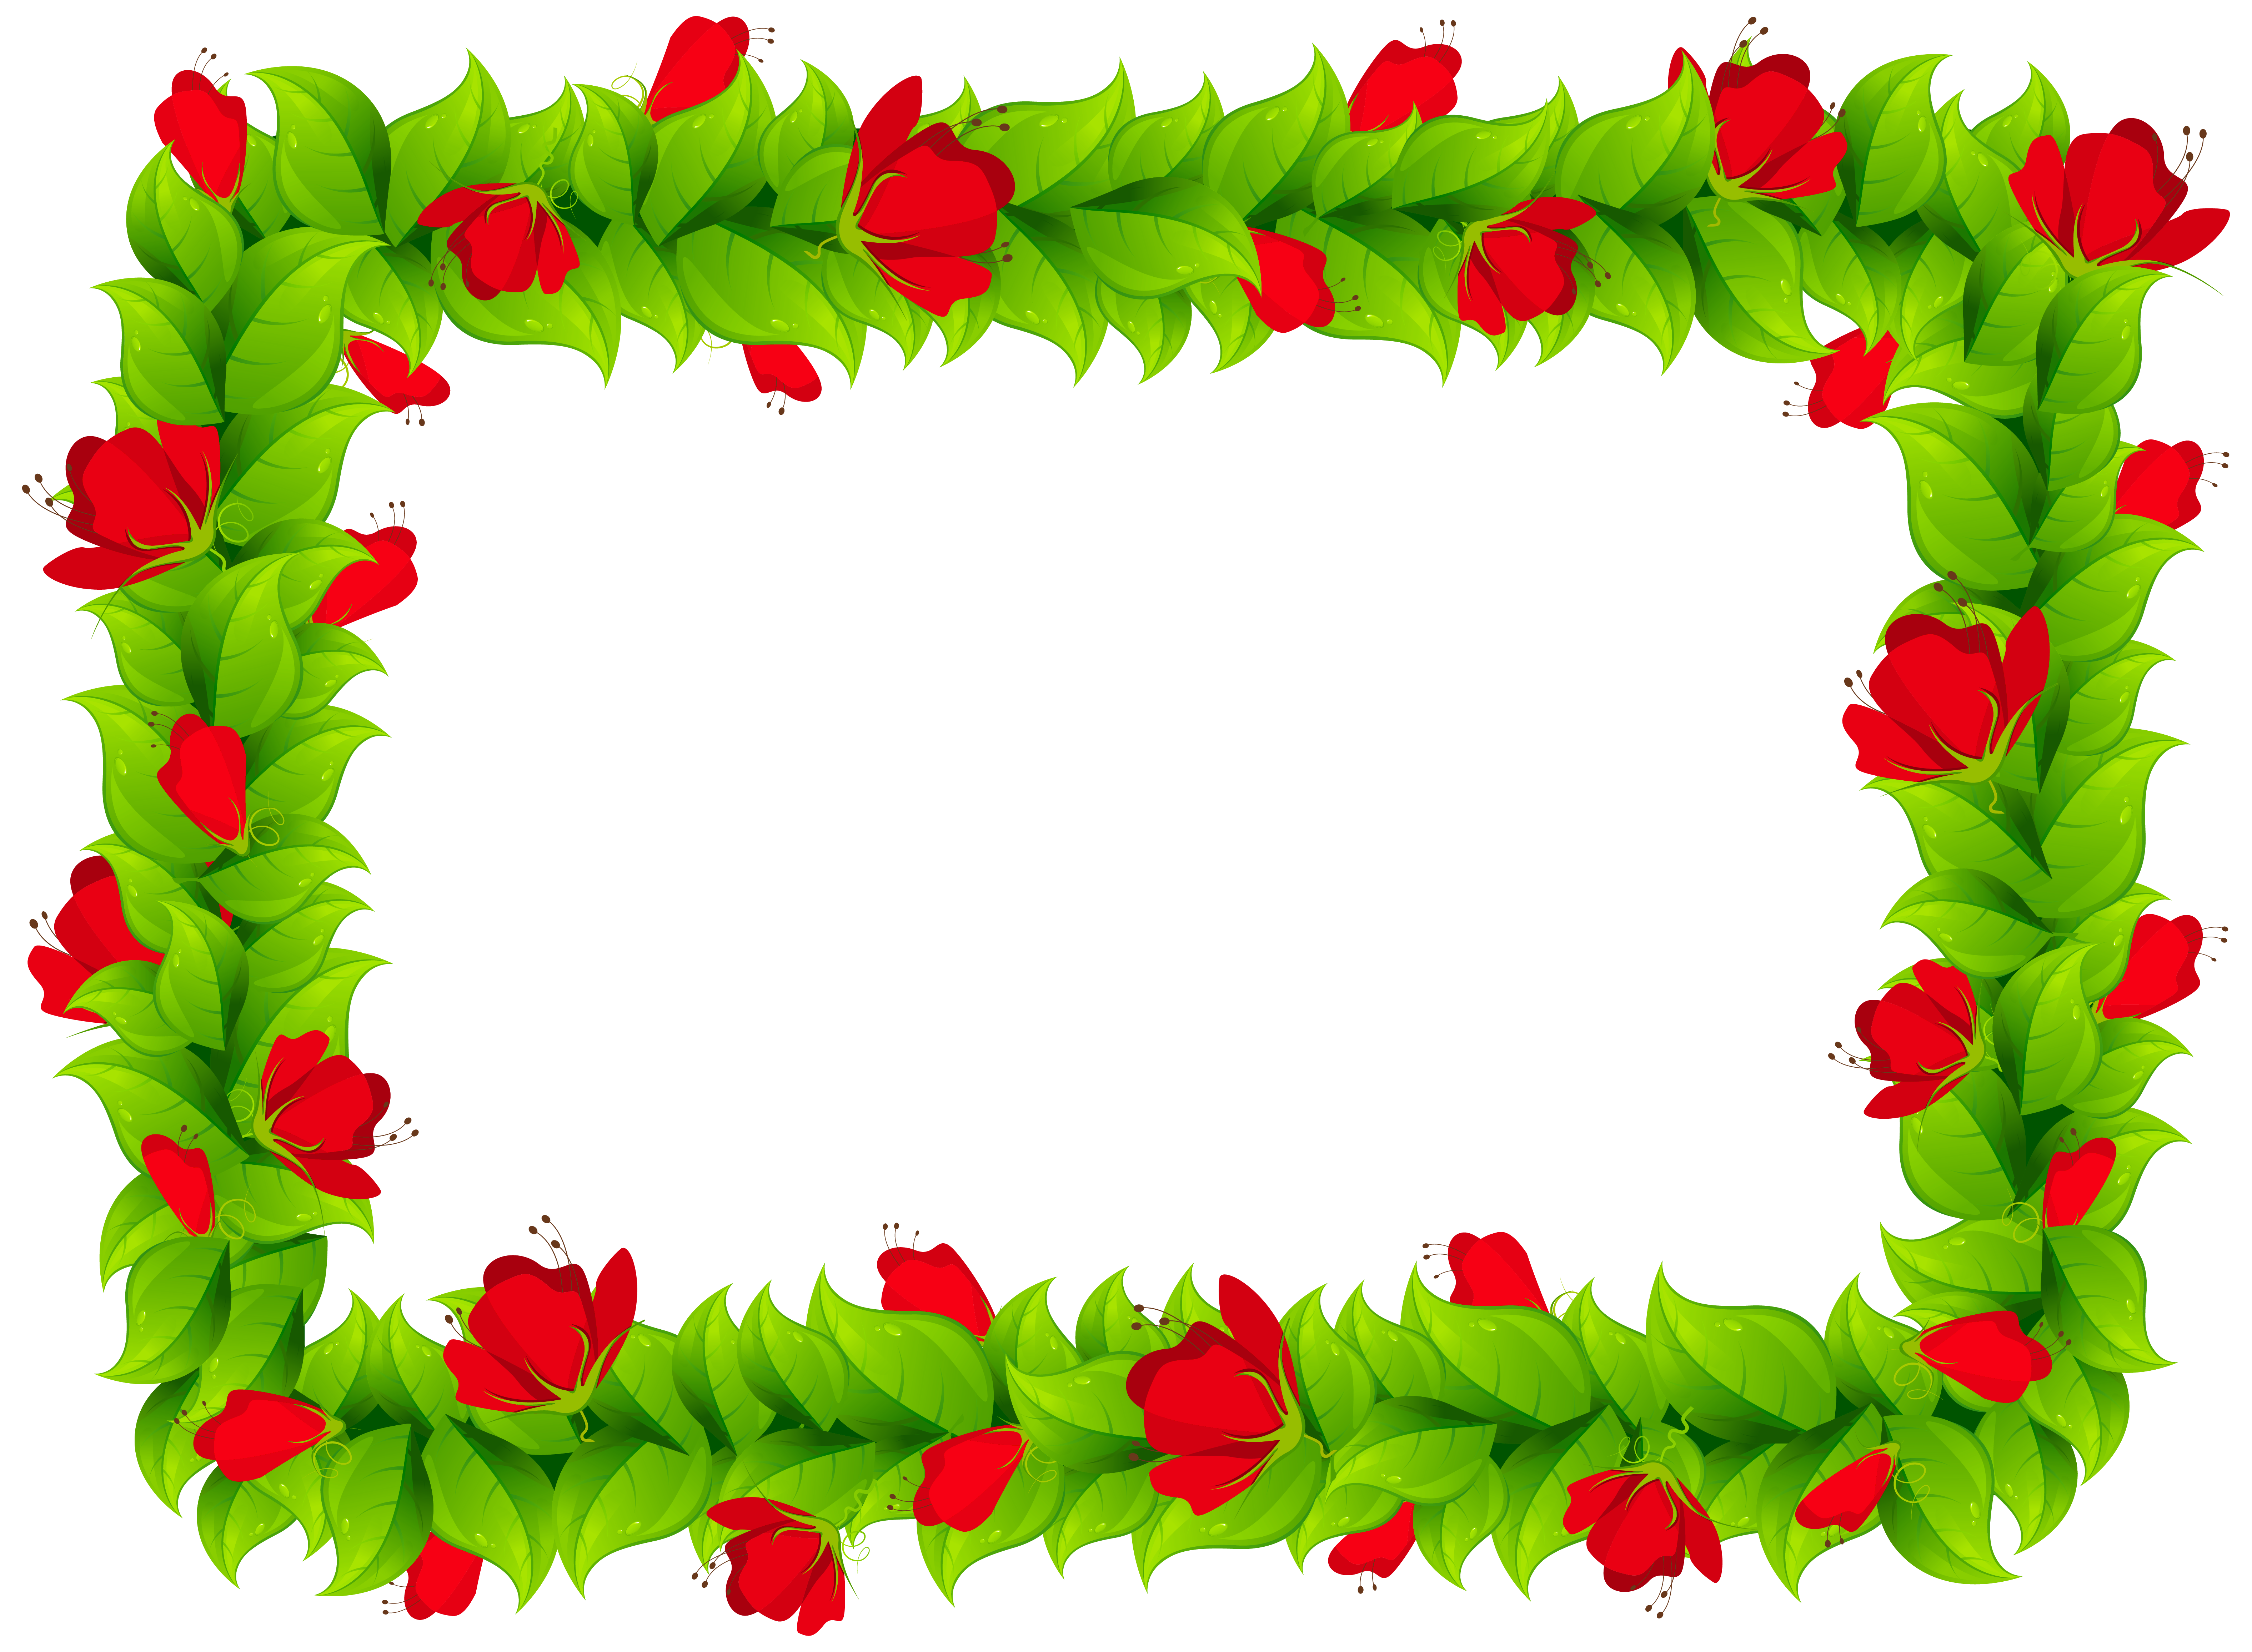 Peony clipart frame. Floral border png image